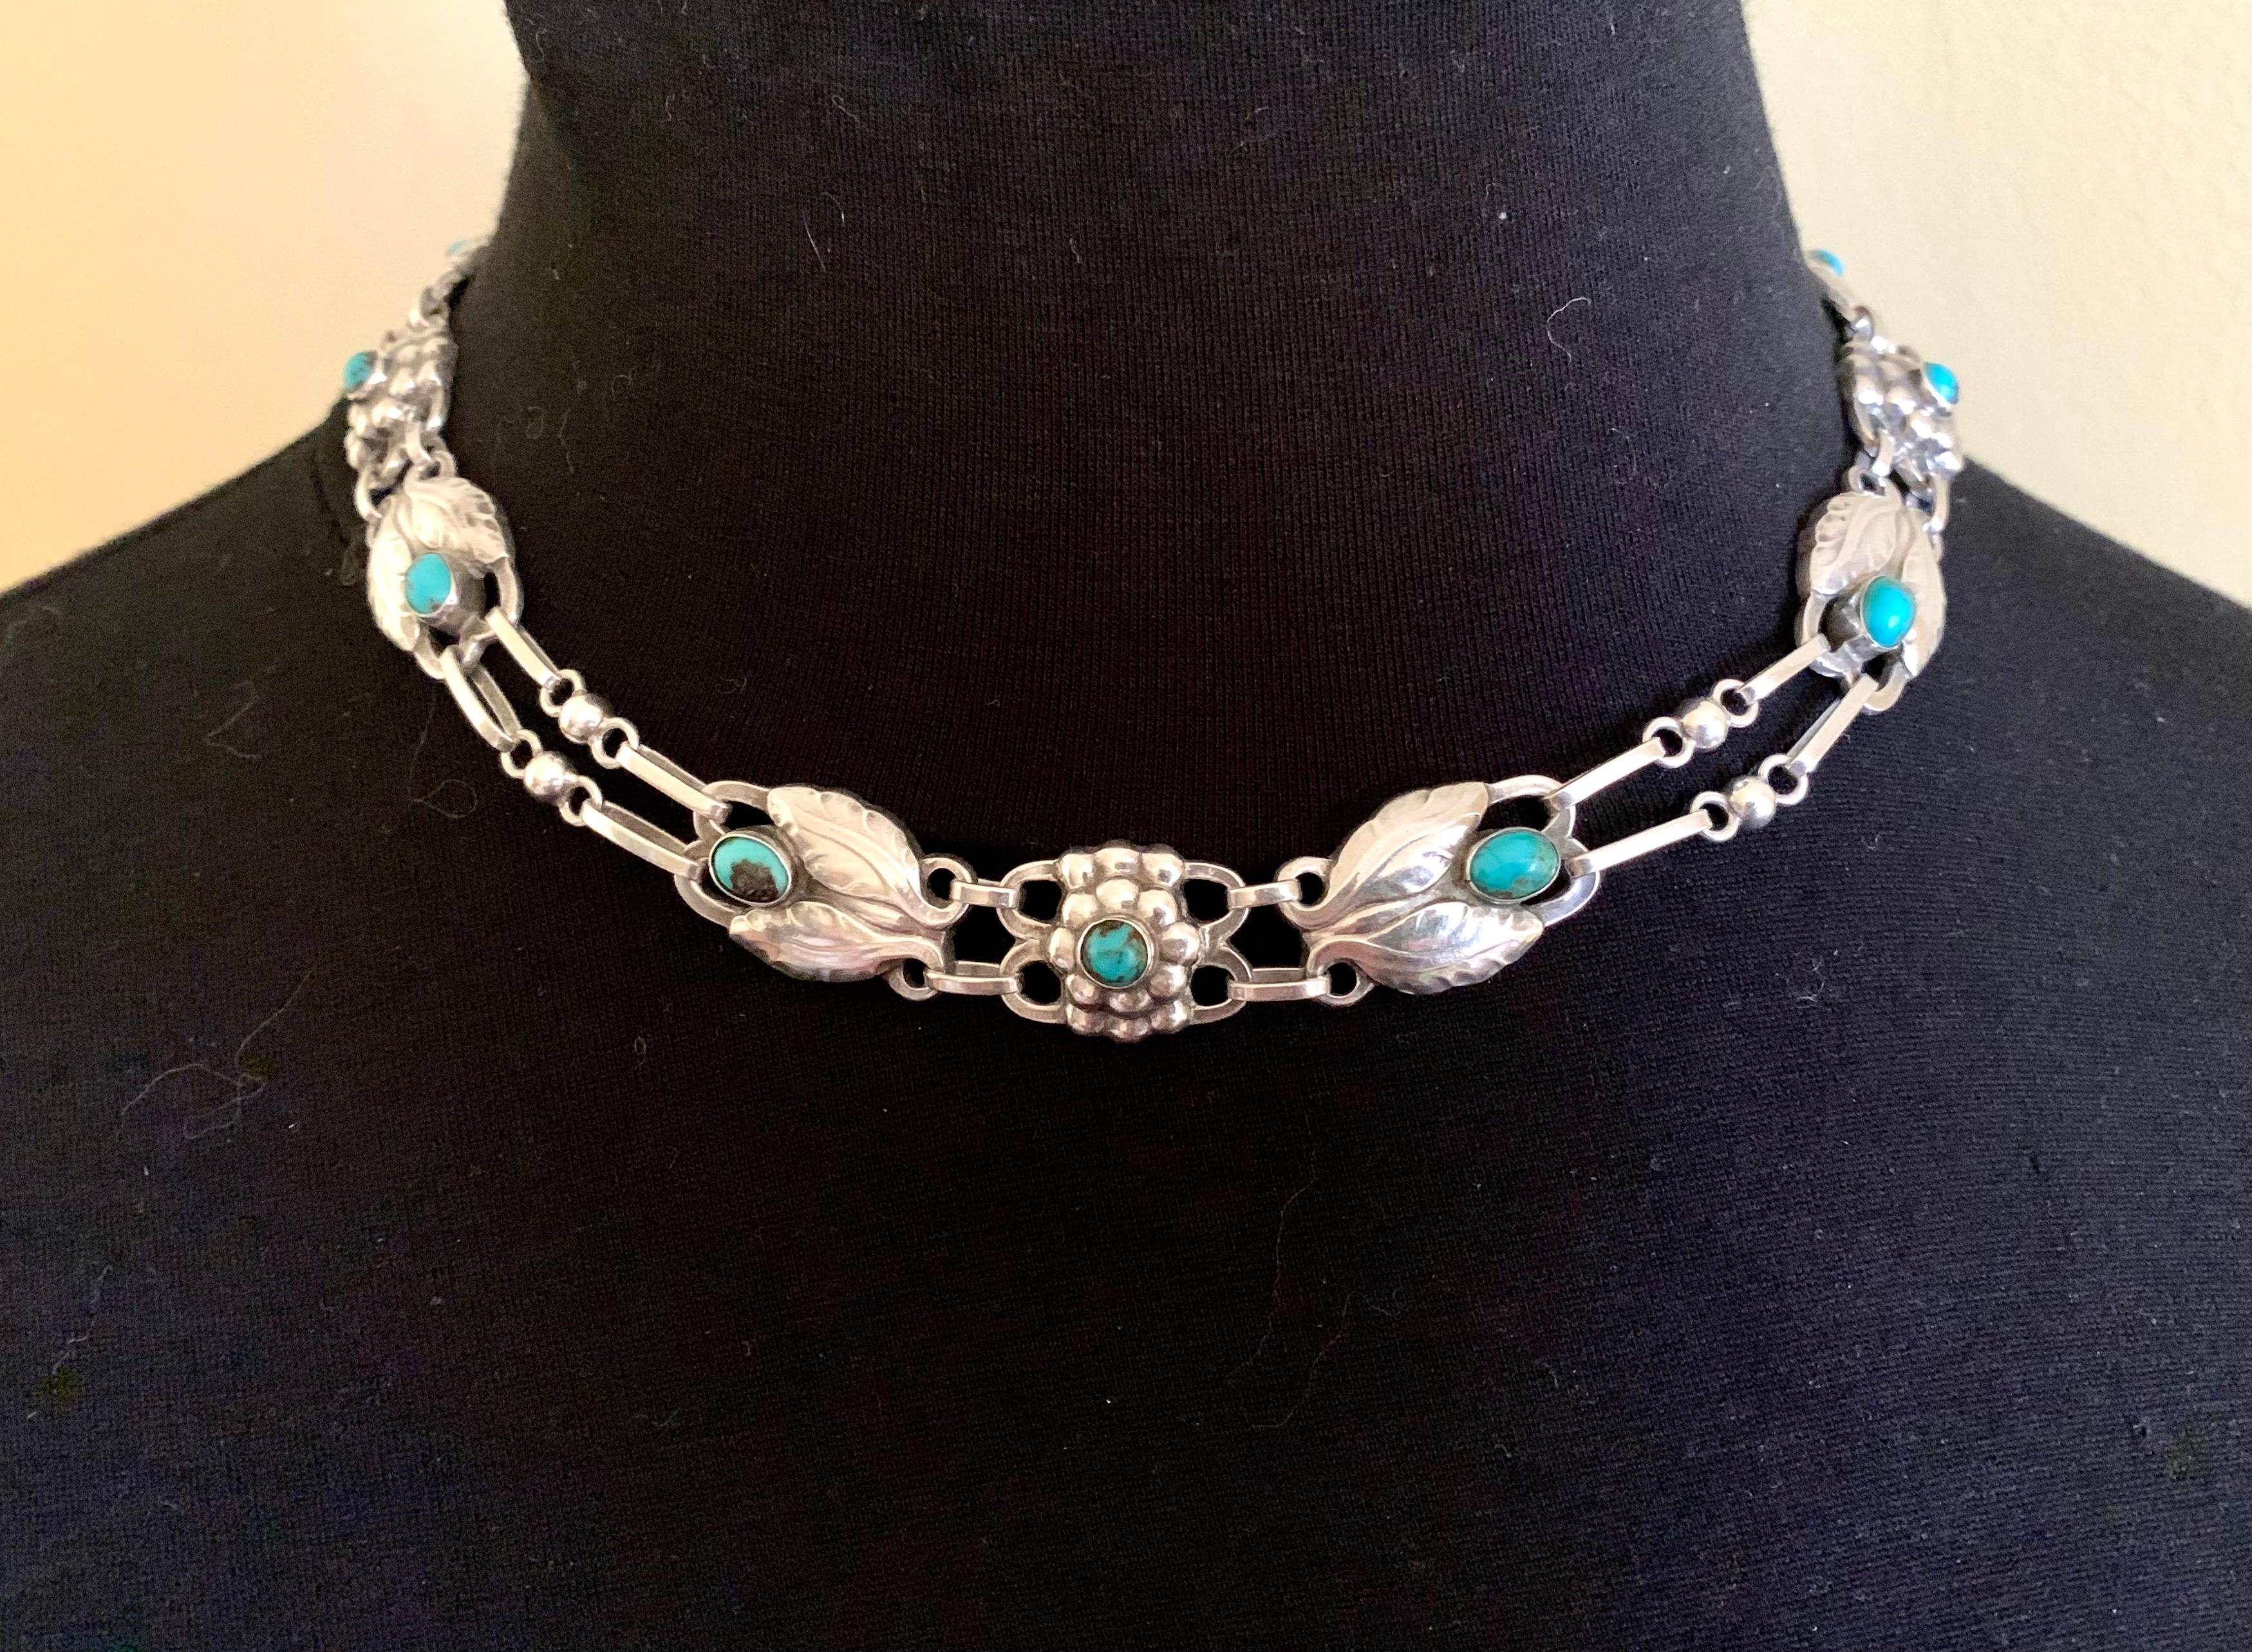 Iconic Arts and Crafts era turquoise and silver #1 necklace by Georg Jensen
1910-1925
Turquoise and silver pieces by Georg Jensen are rarely available, perhaps because very few people wish to part with the striking combination of the vibrant